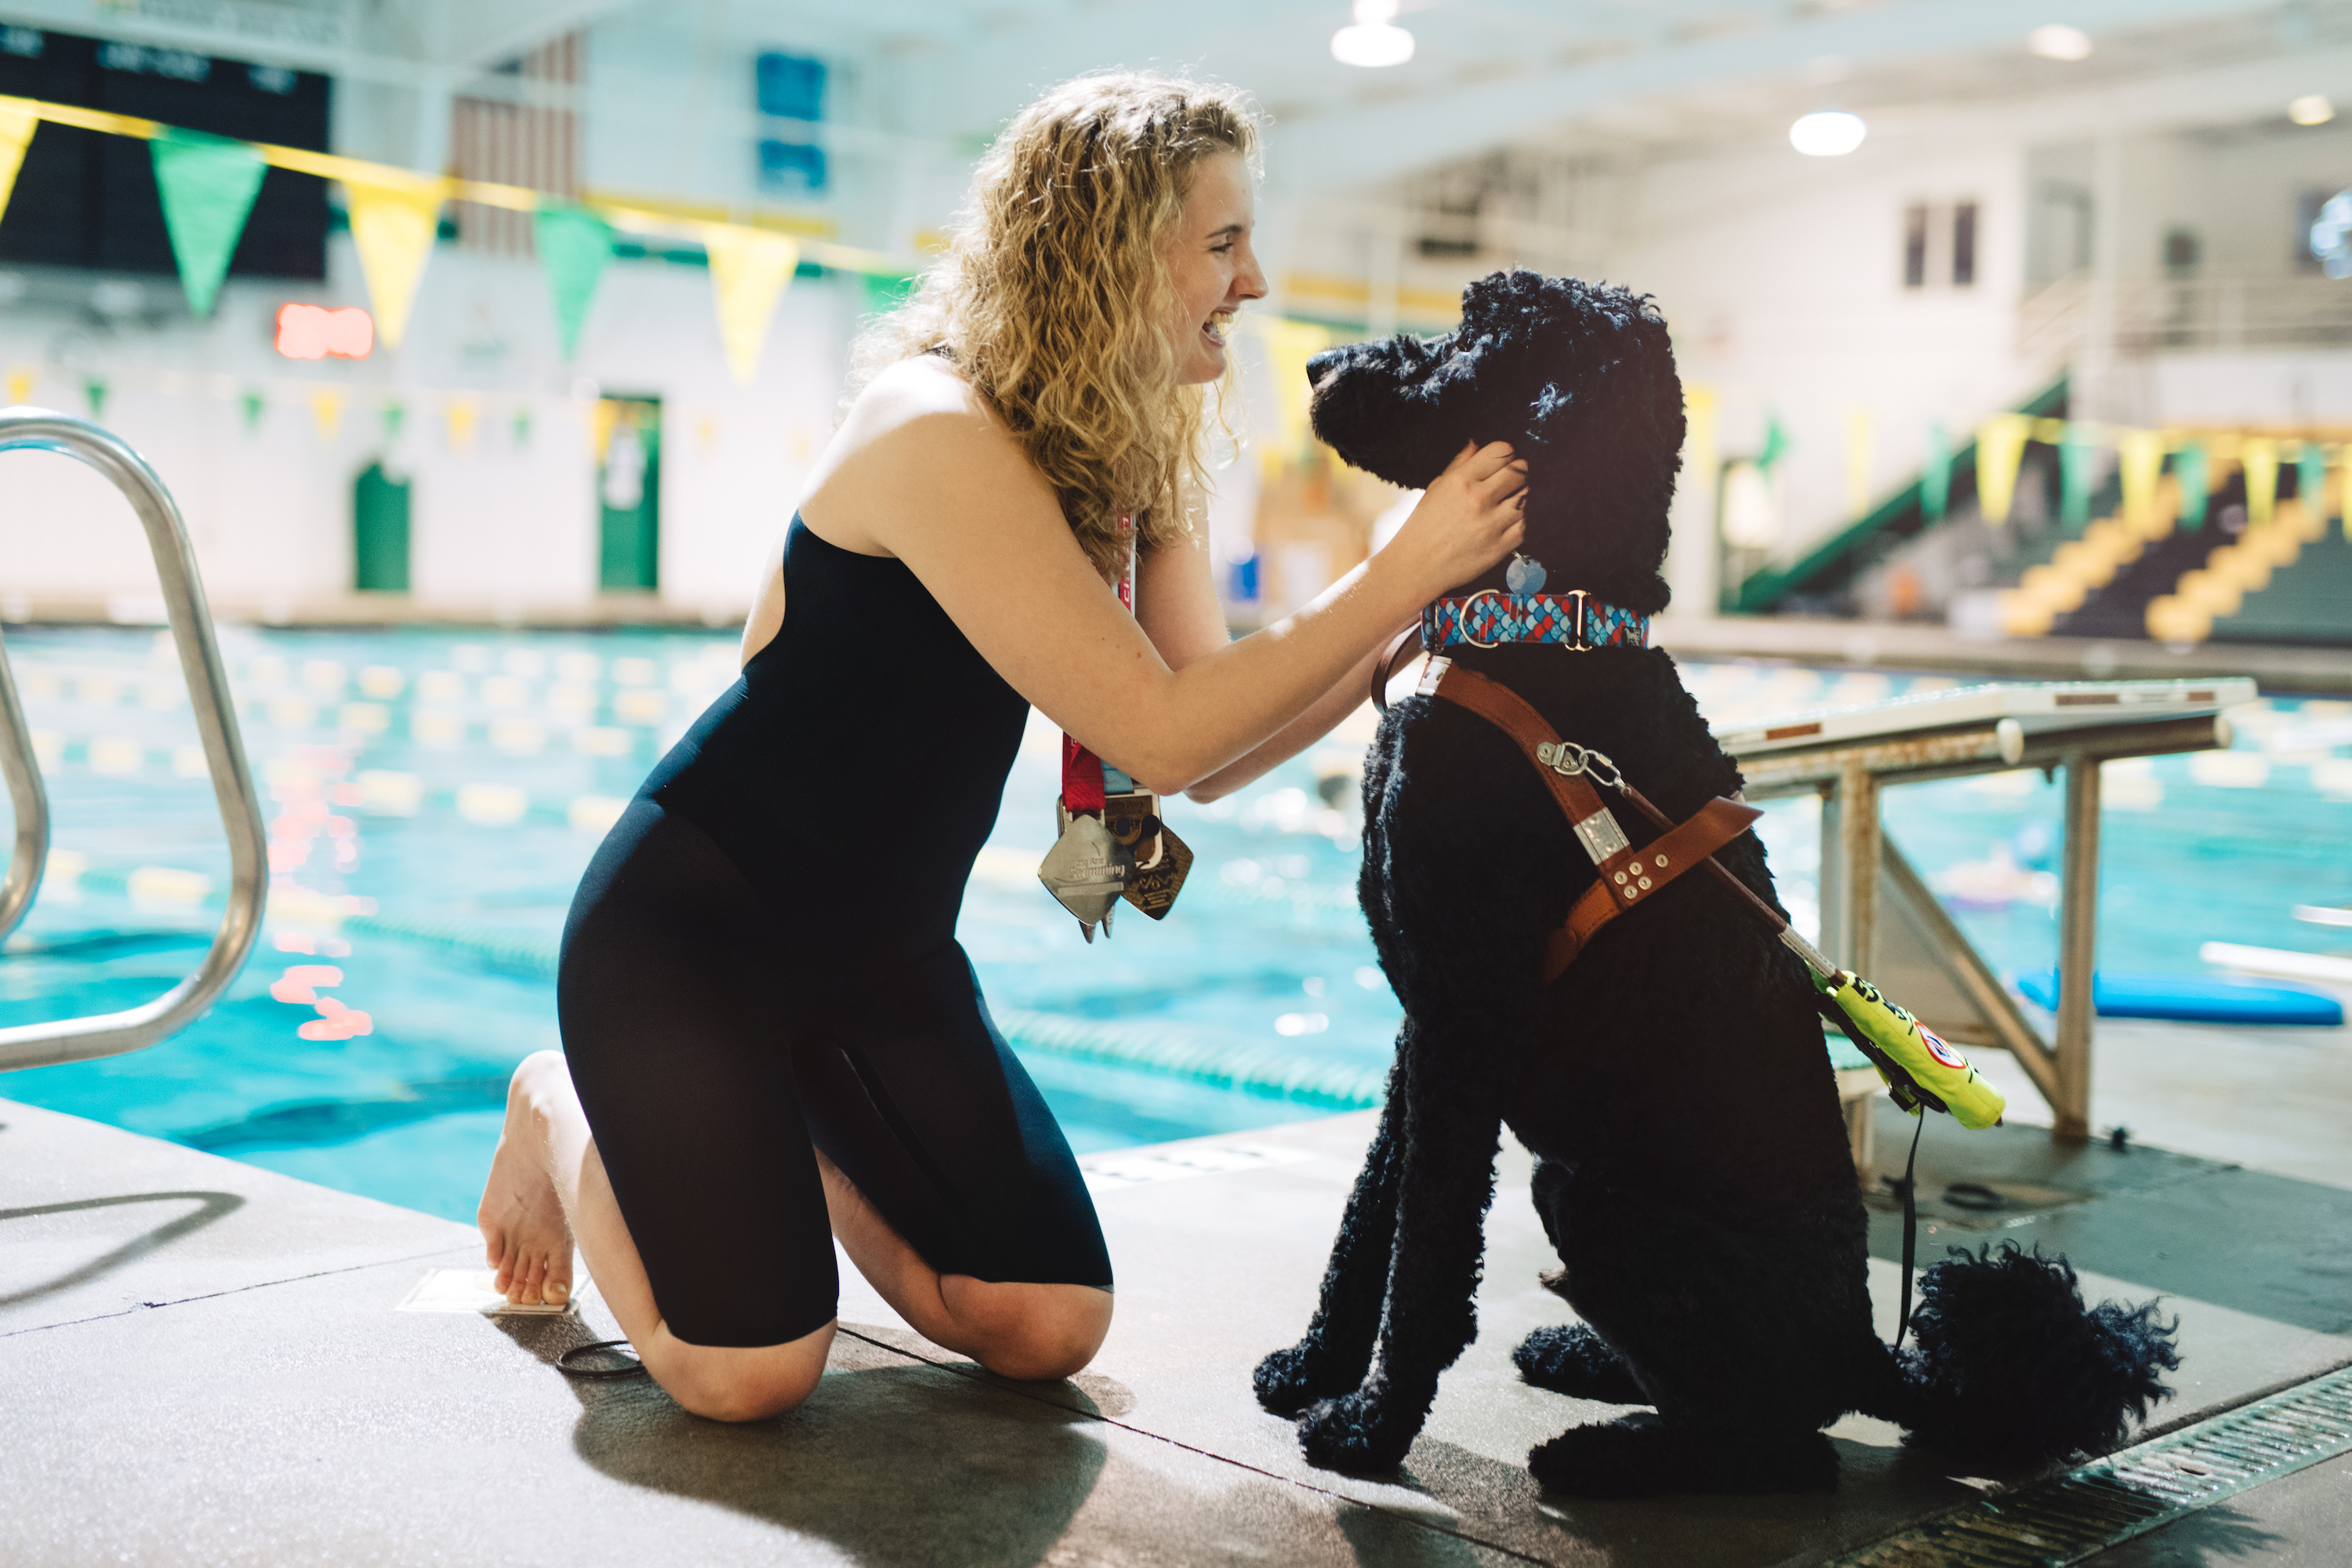 A young girl swimmer pets her service dog, a black poodle, at a pool.